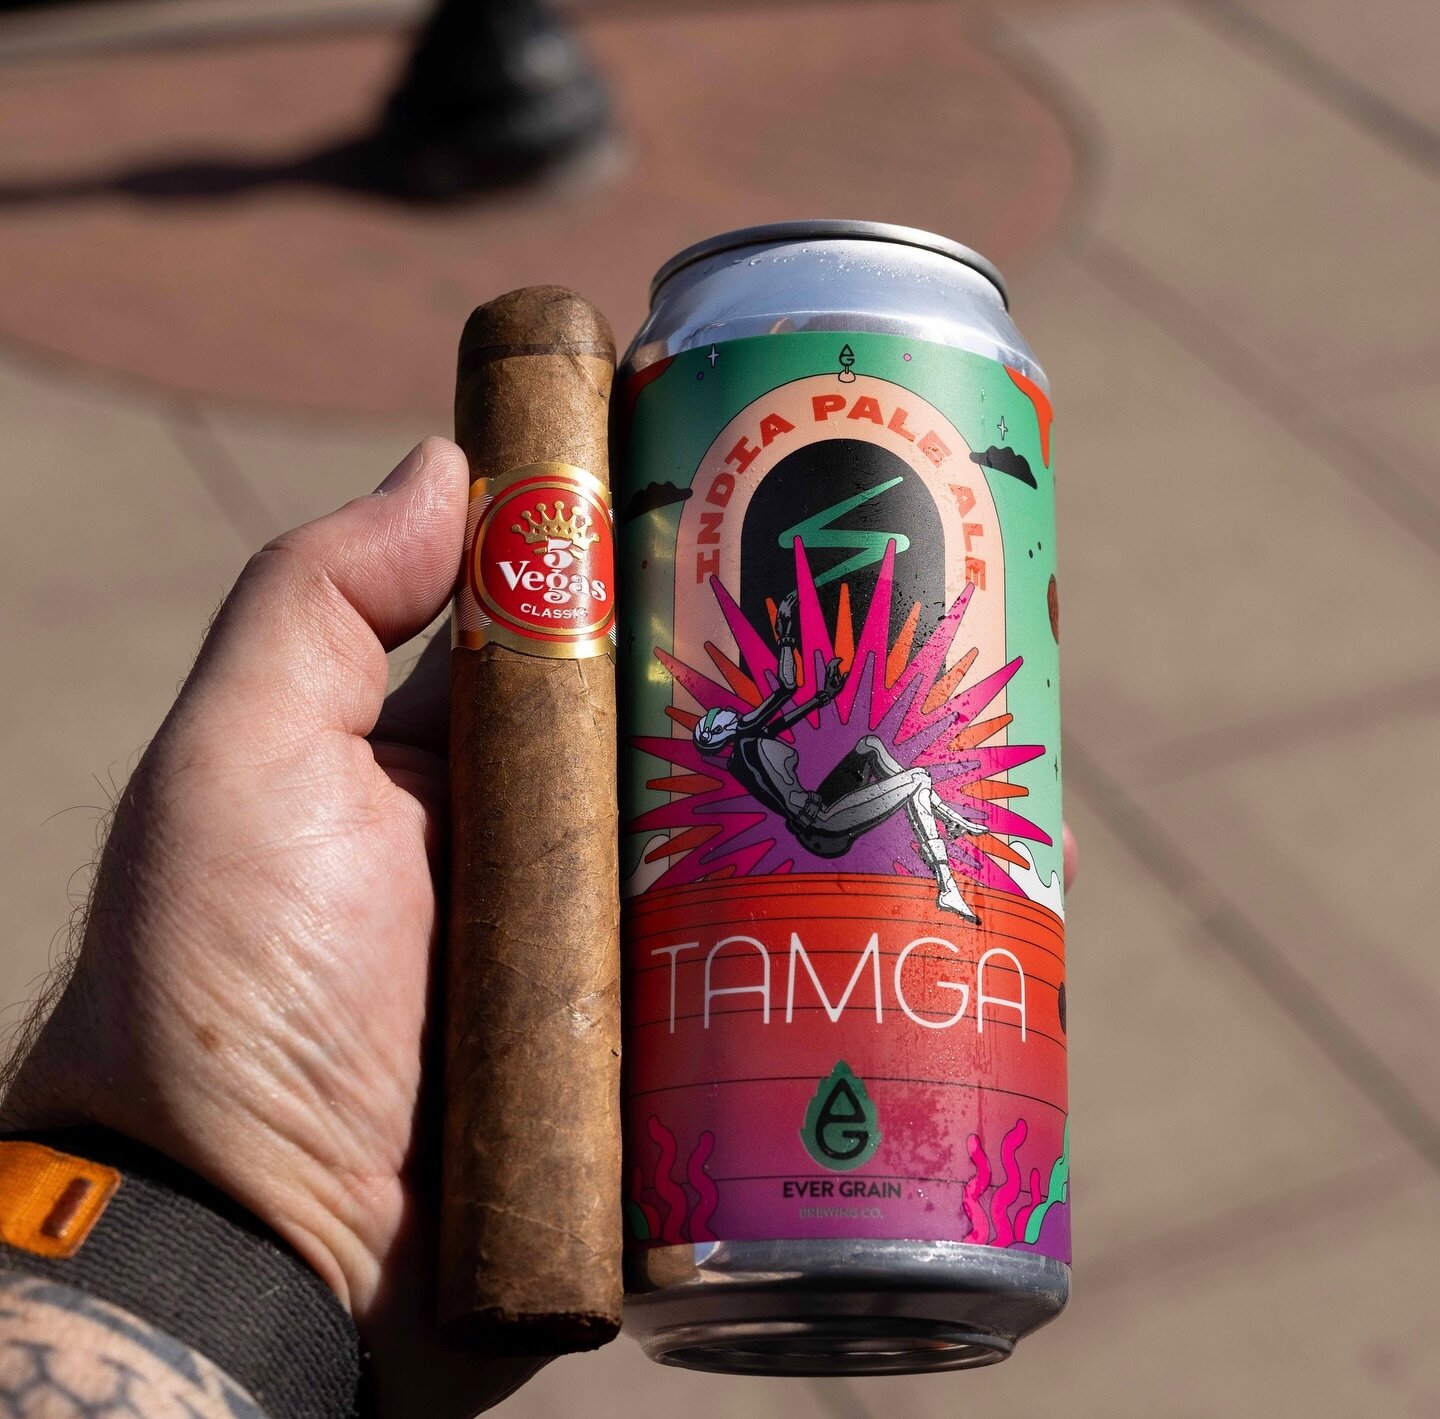 When Your Beer Has More Identity Issues Than a Teenage Angst Novel.

Cigar: 5 Vegas Classic The Judge.